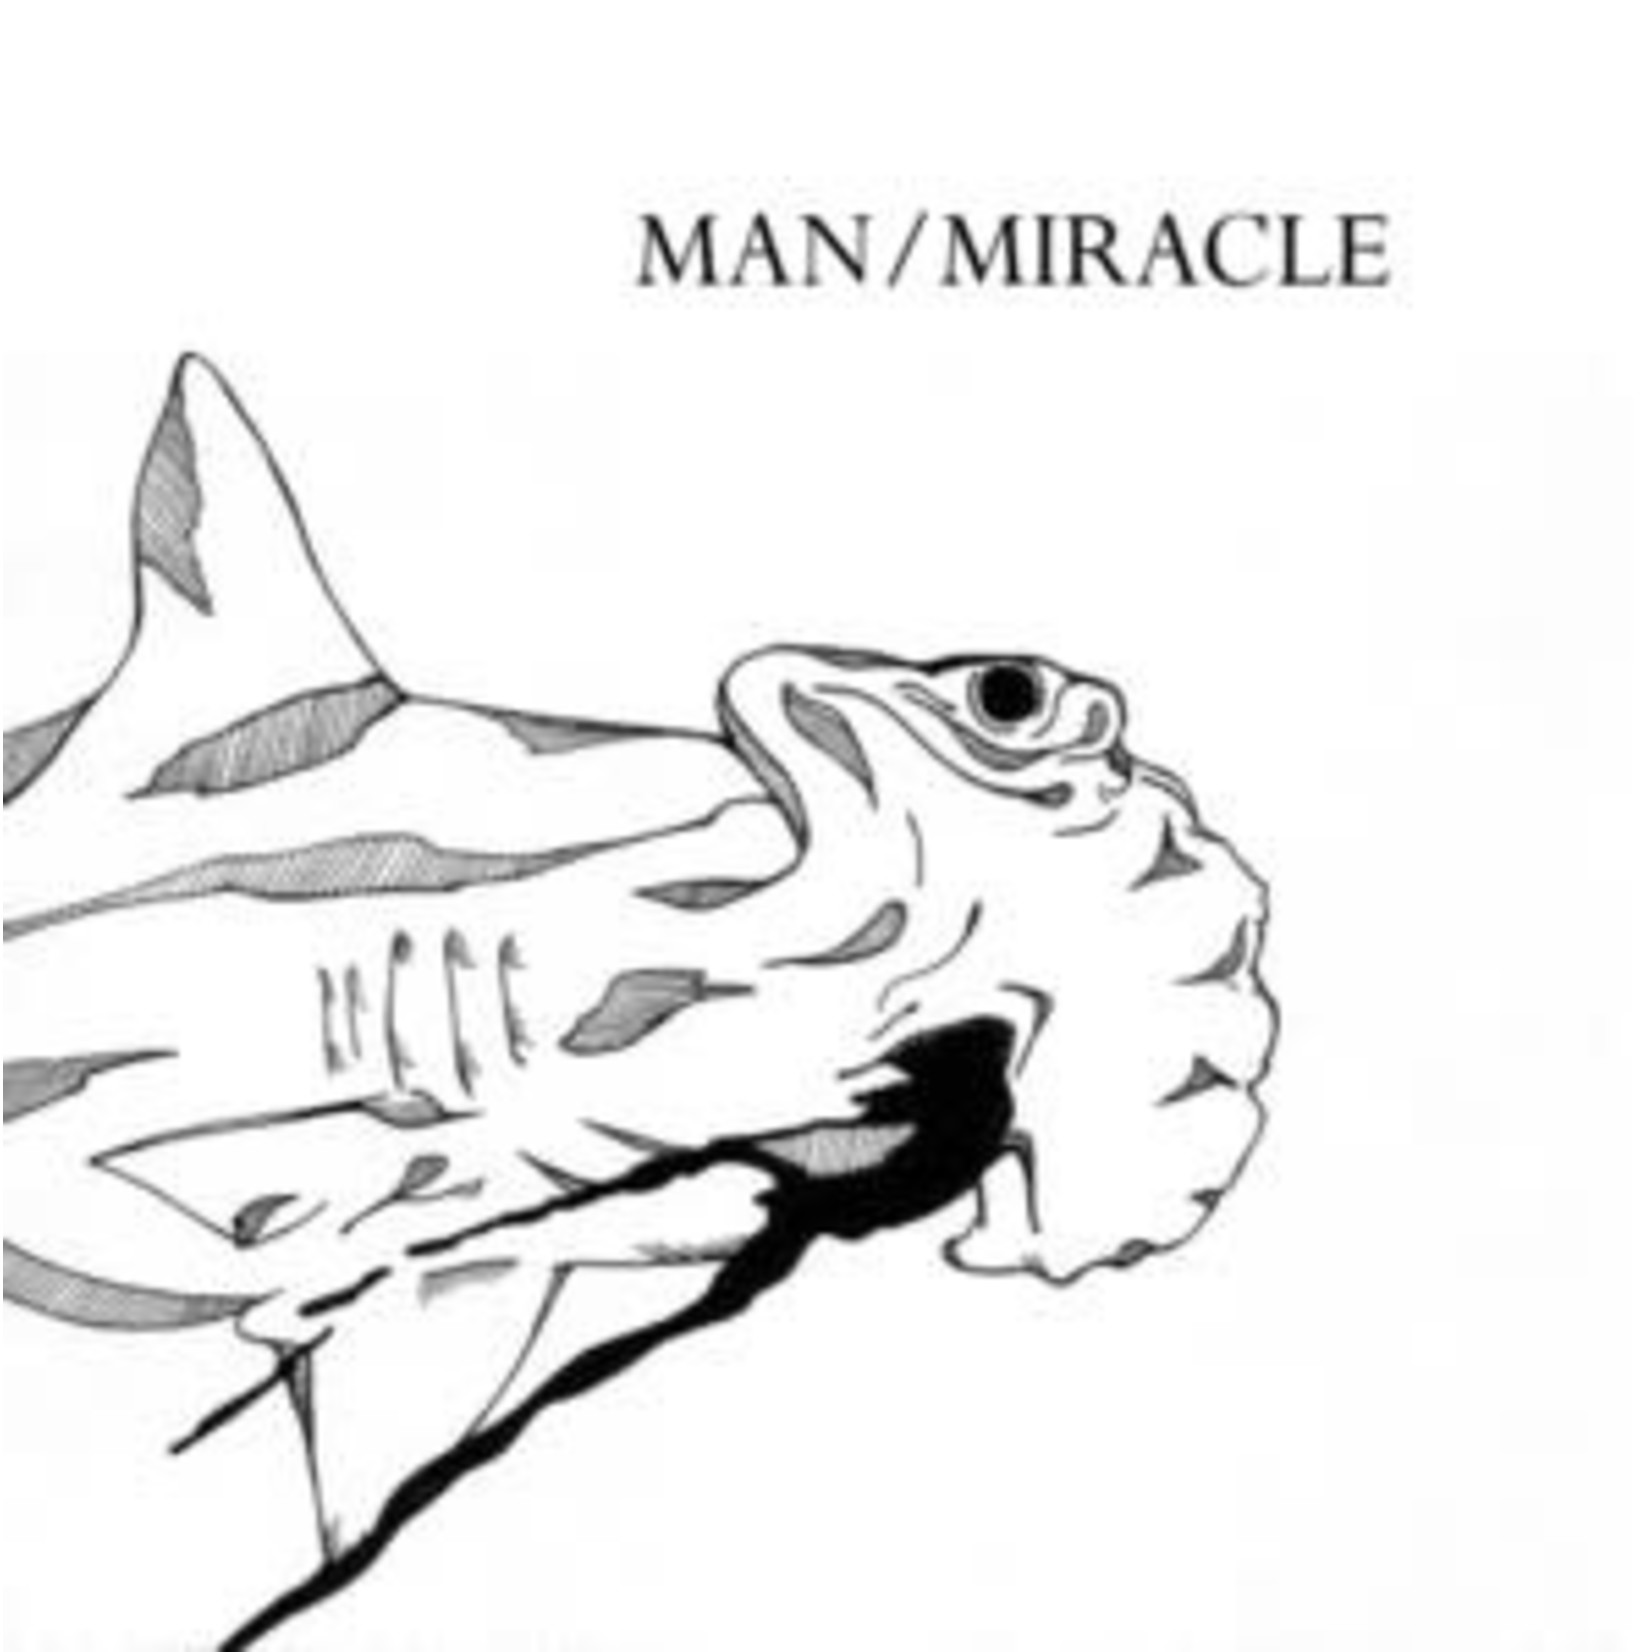 Man/Miracle - Pushing And Shoving / You've Got A Hold On Me (7") {VG+/VG+}